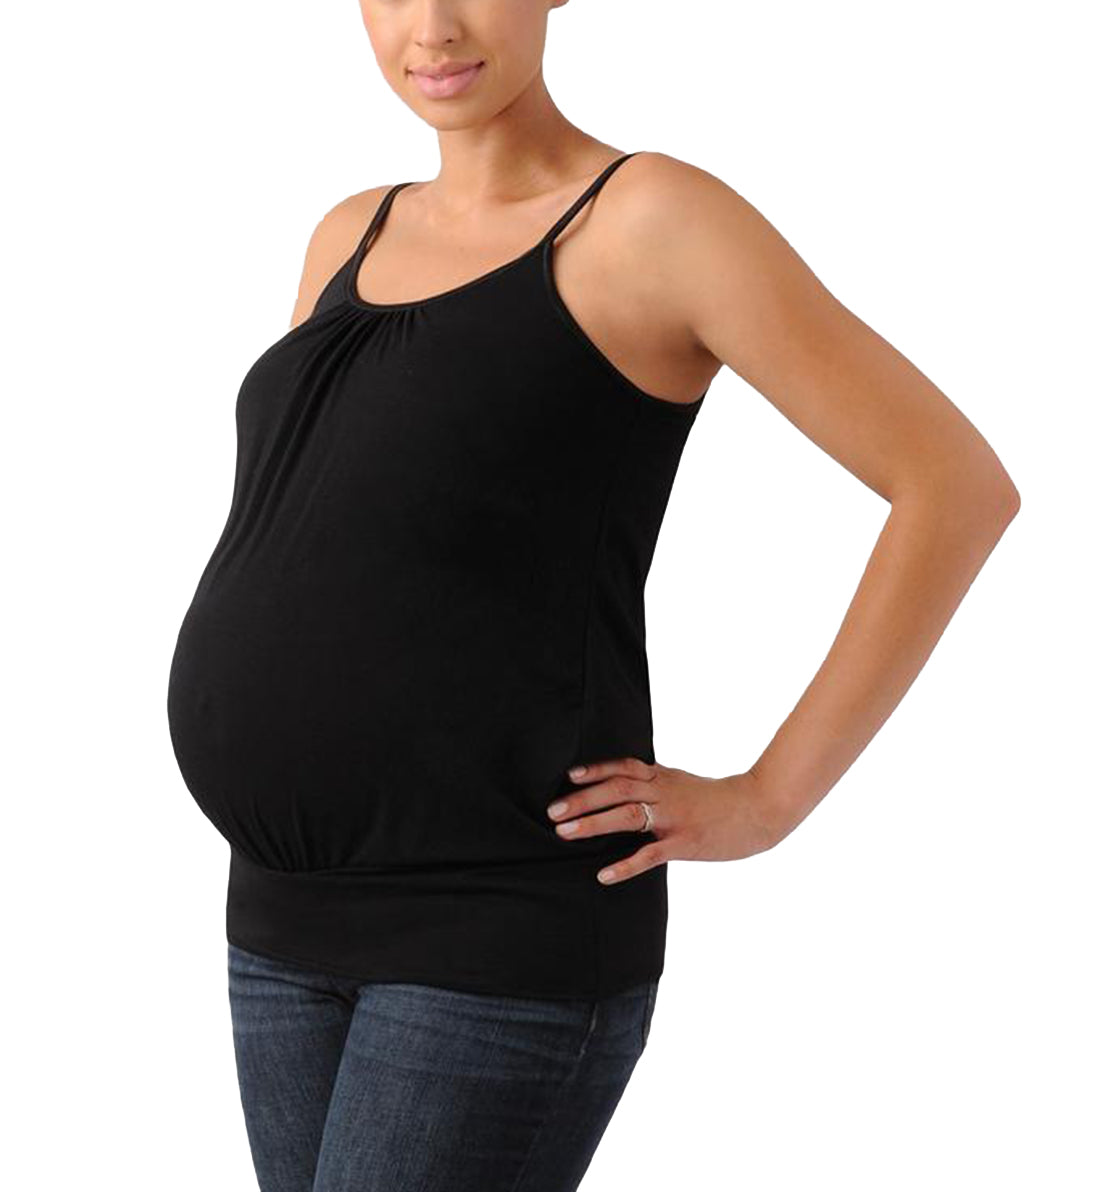 Belly Bandit BEFORE DURING & AFTER TANK (BDAT),Small,Black - Black,Small